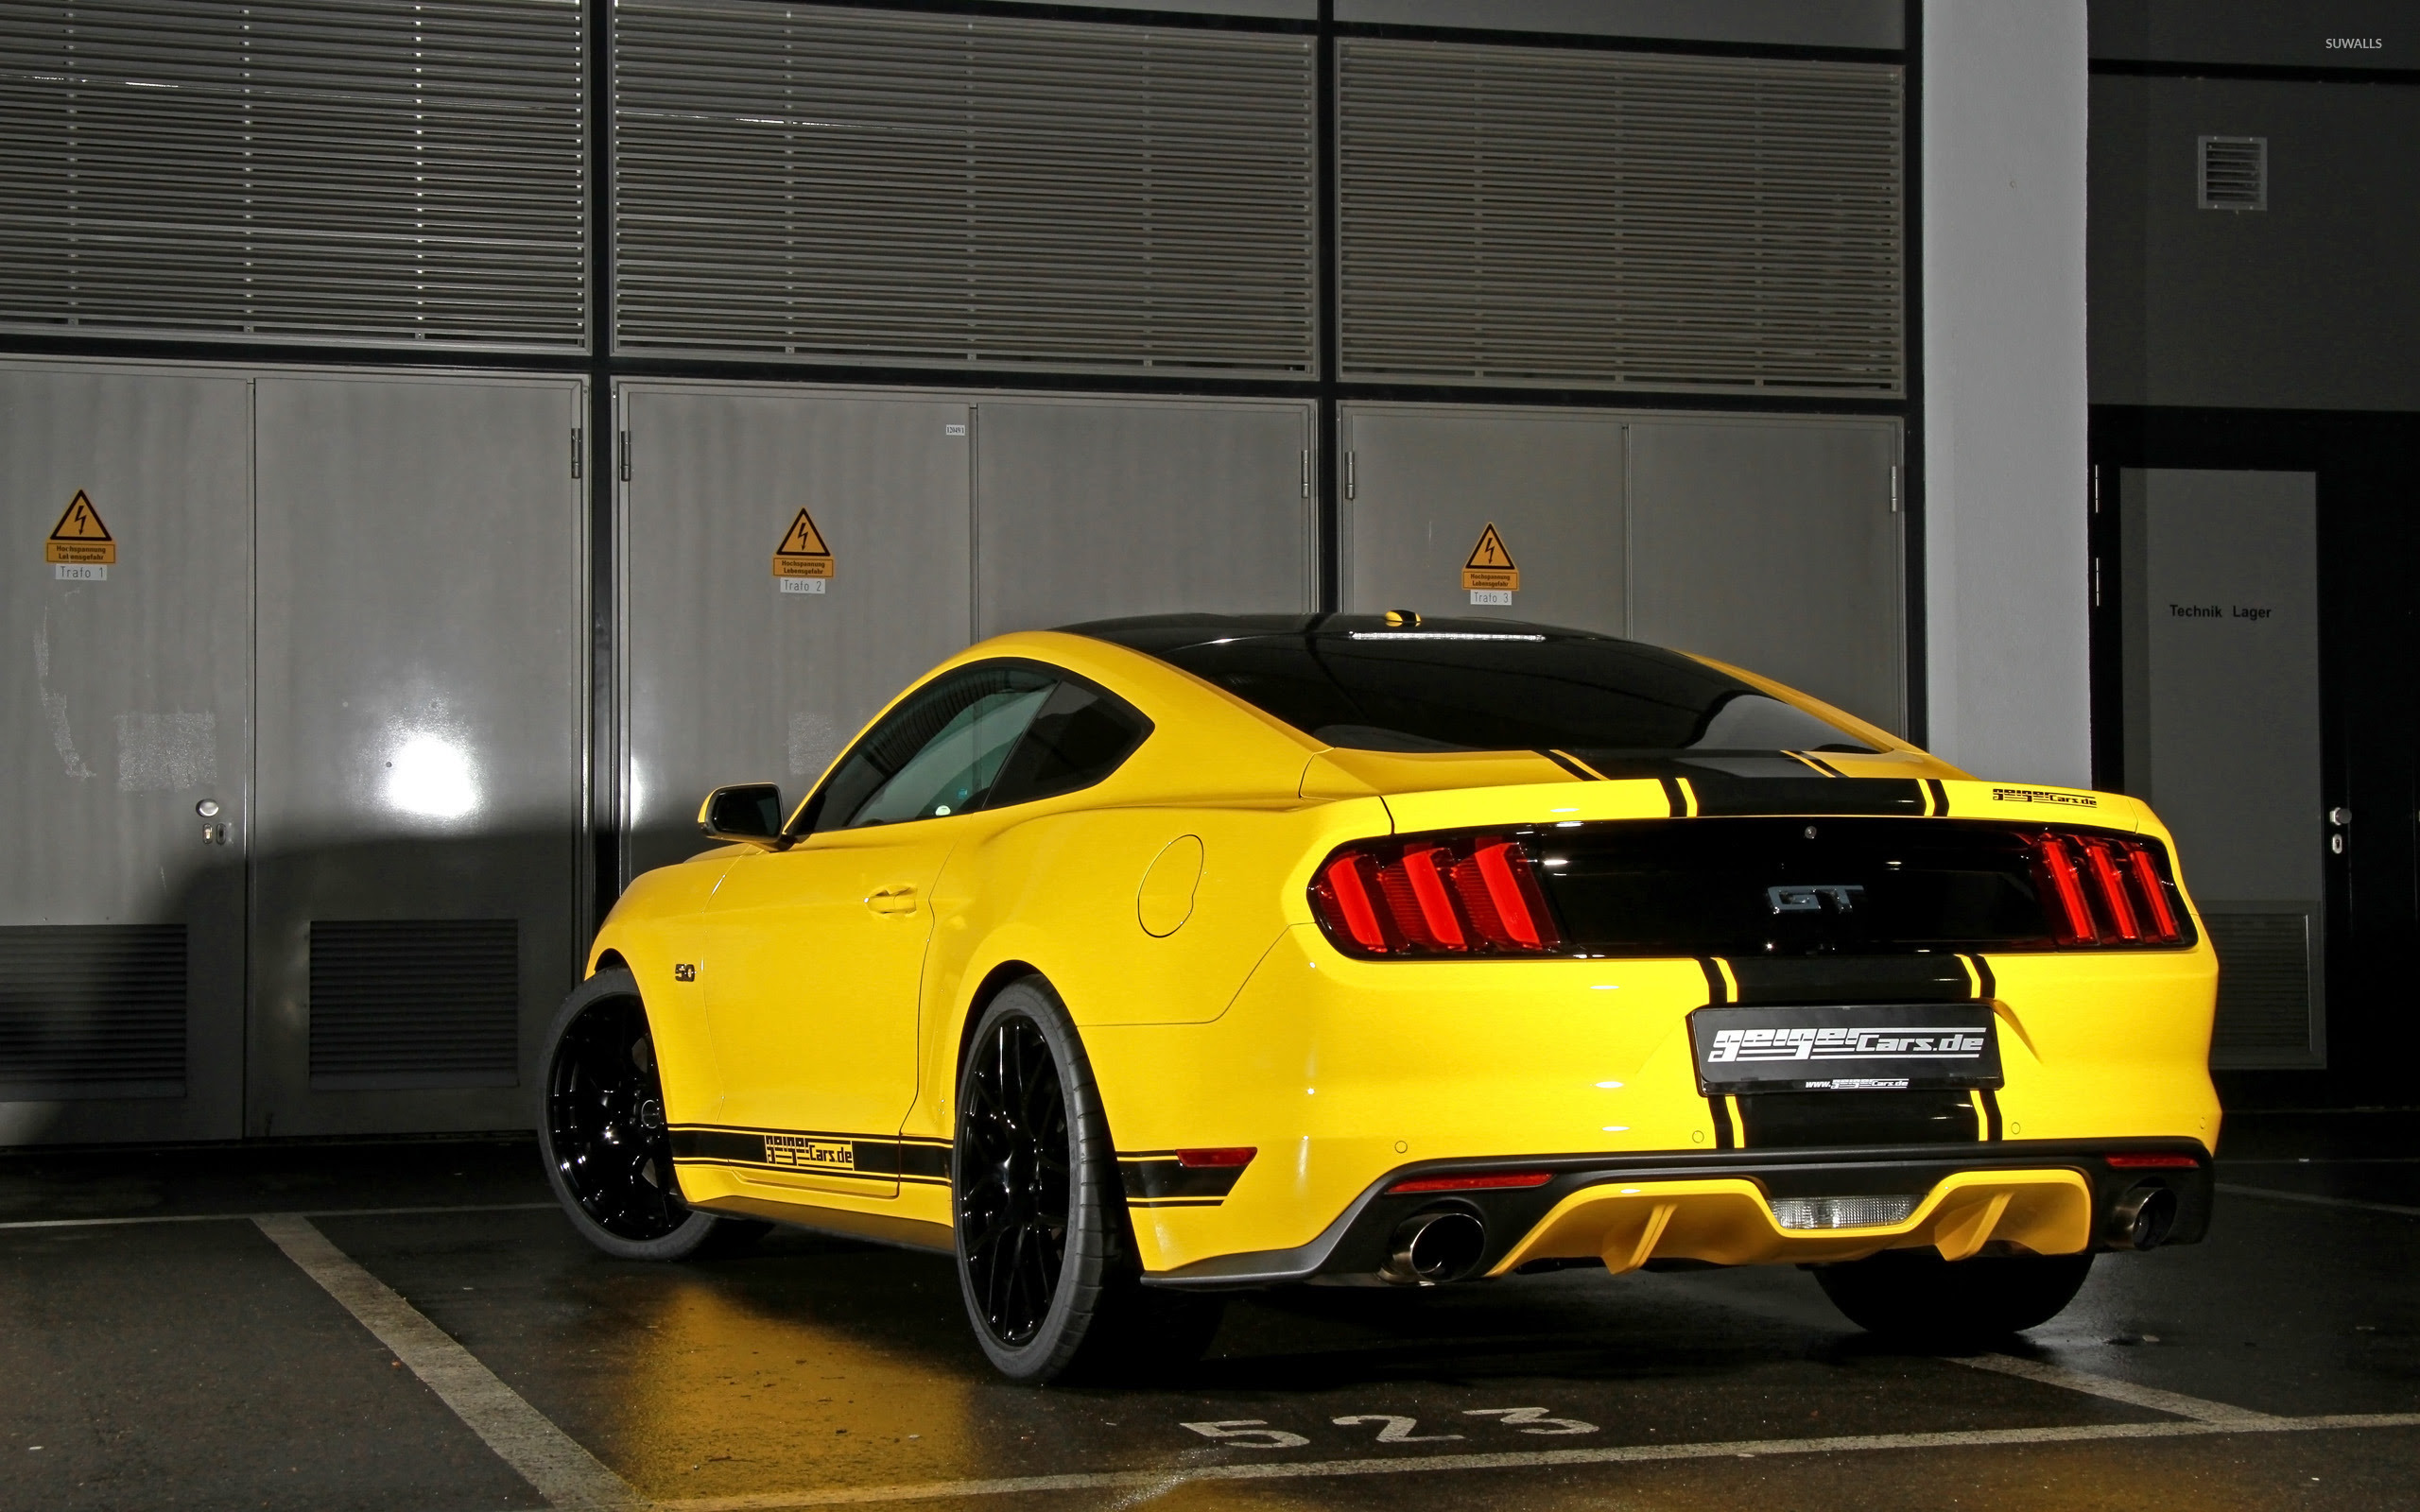 2015 Yellow GeigerCars Ford Mustang GT back view wallpaper Car